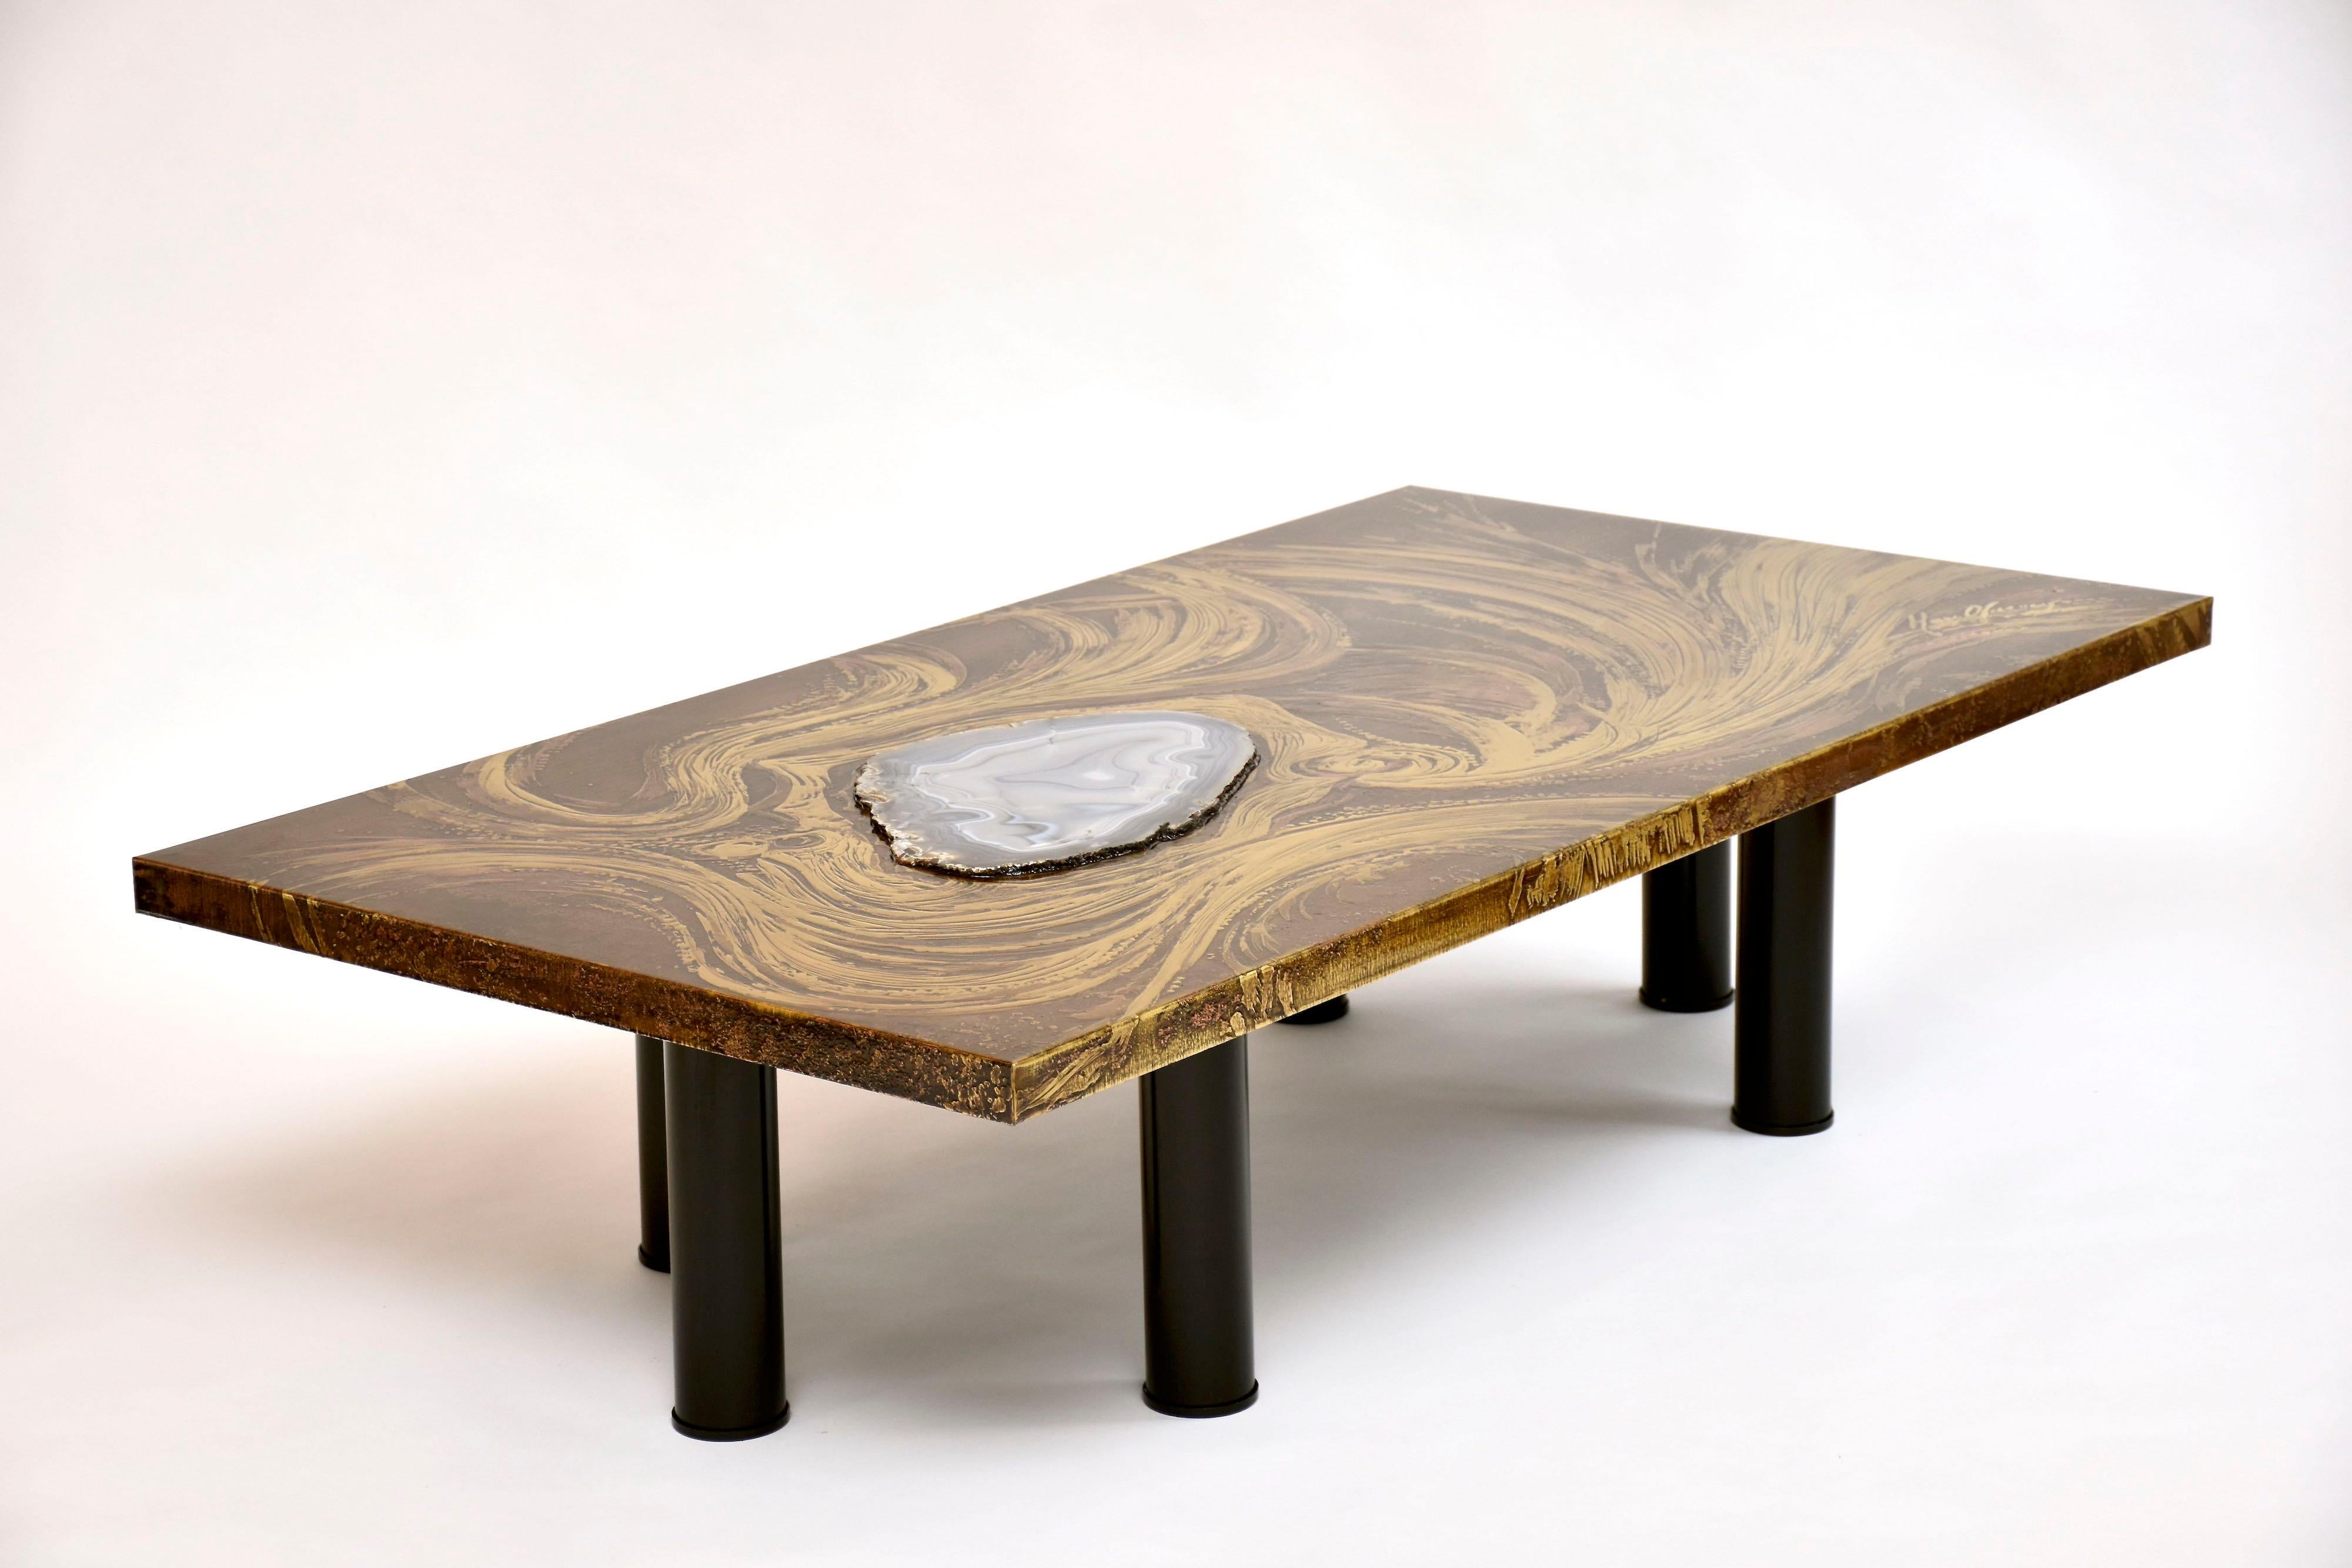 Brass etched coffee table by Marc D'Haenens with agate inlay In Excellent Condition For Sale In SON EN BREUGEL, NL